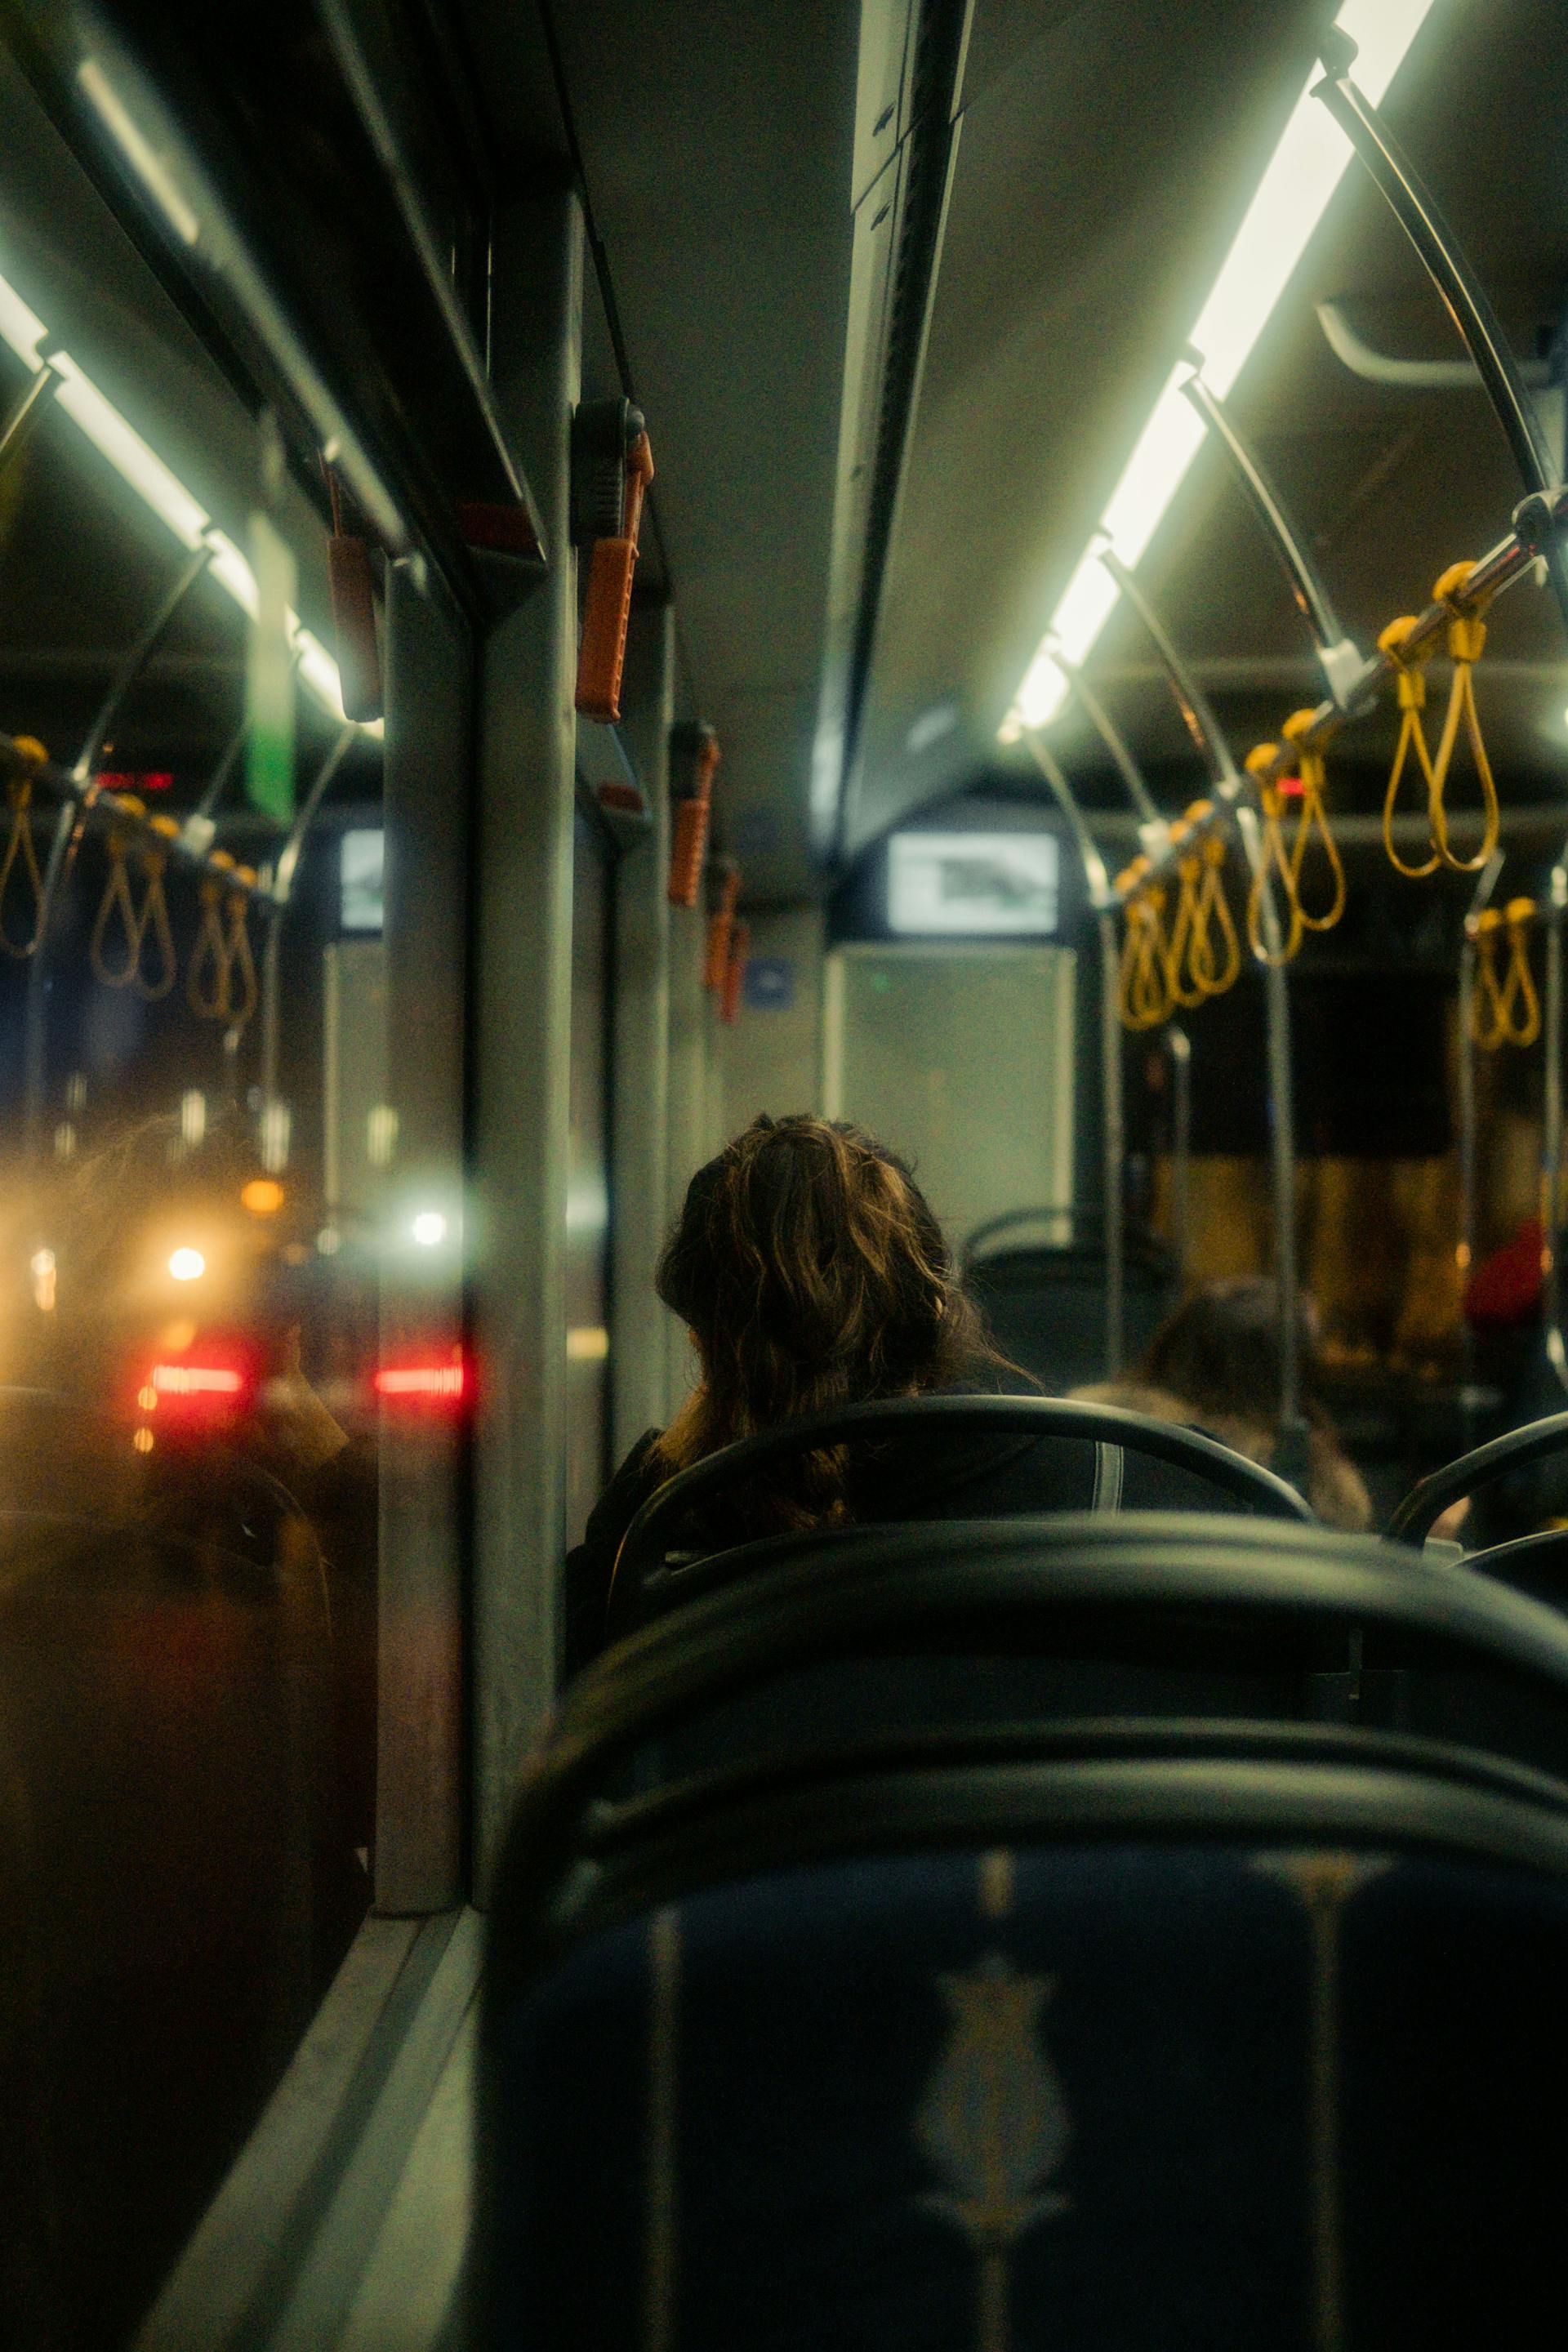 Exhausted and hurt, Catherine takes a bus ride home | Source: Pexels